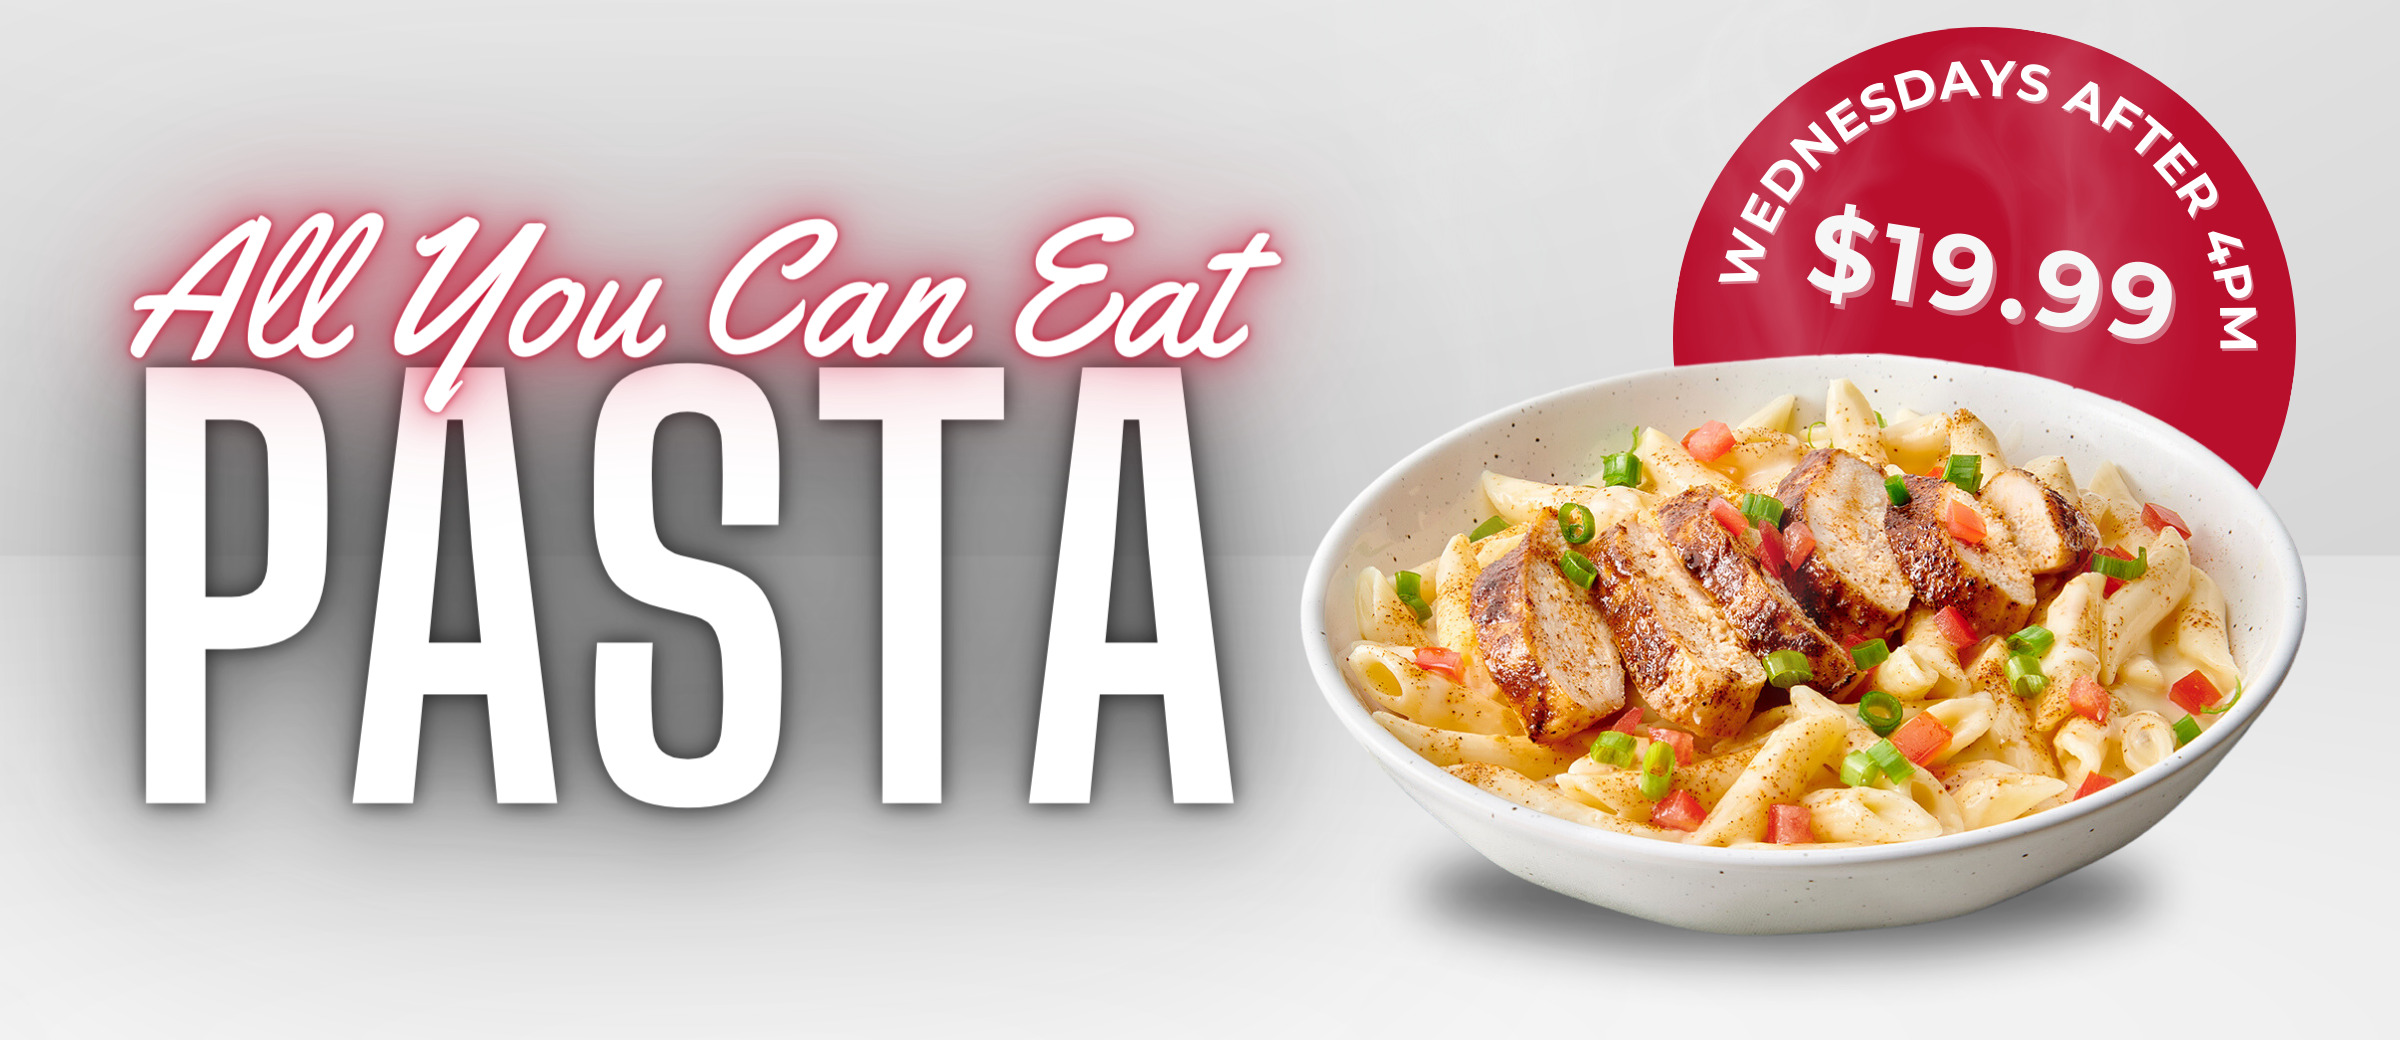 $19.99 All you can eat pasta